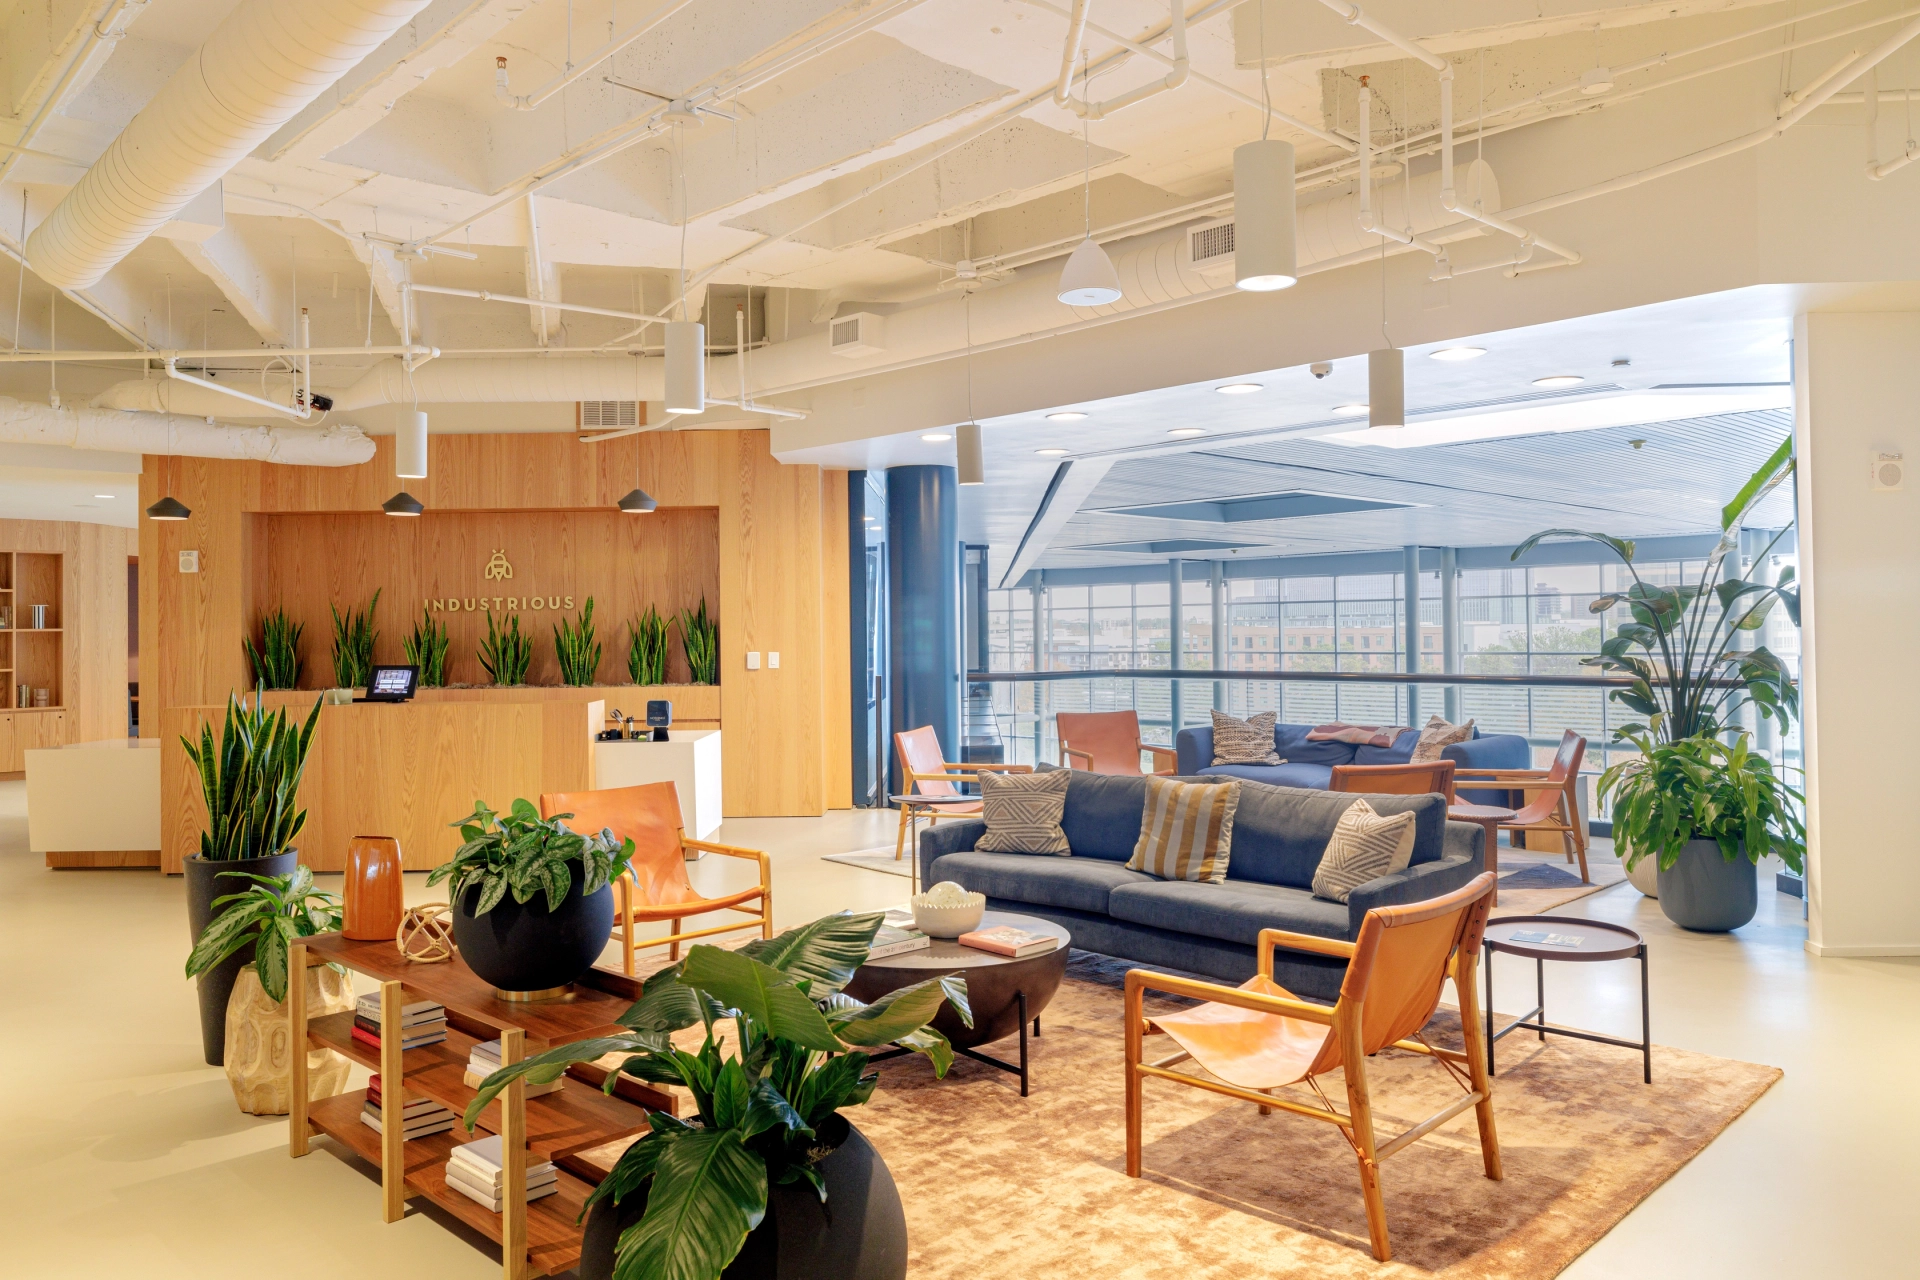 A spacious coworking area with comfortable couches and vibrant plants.